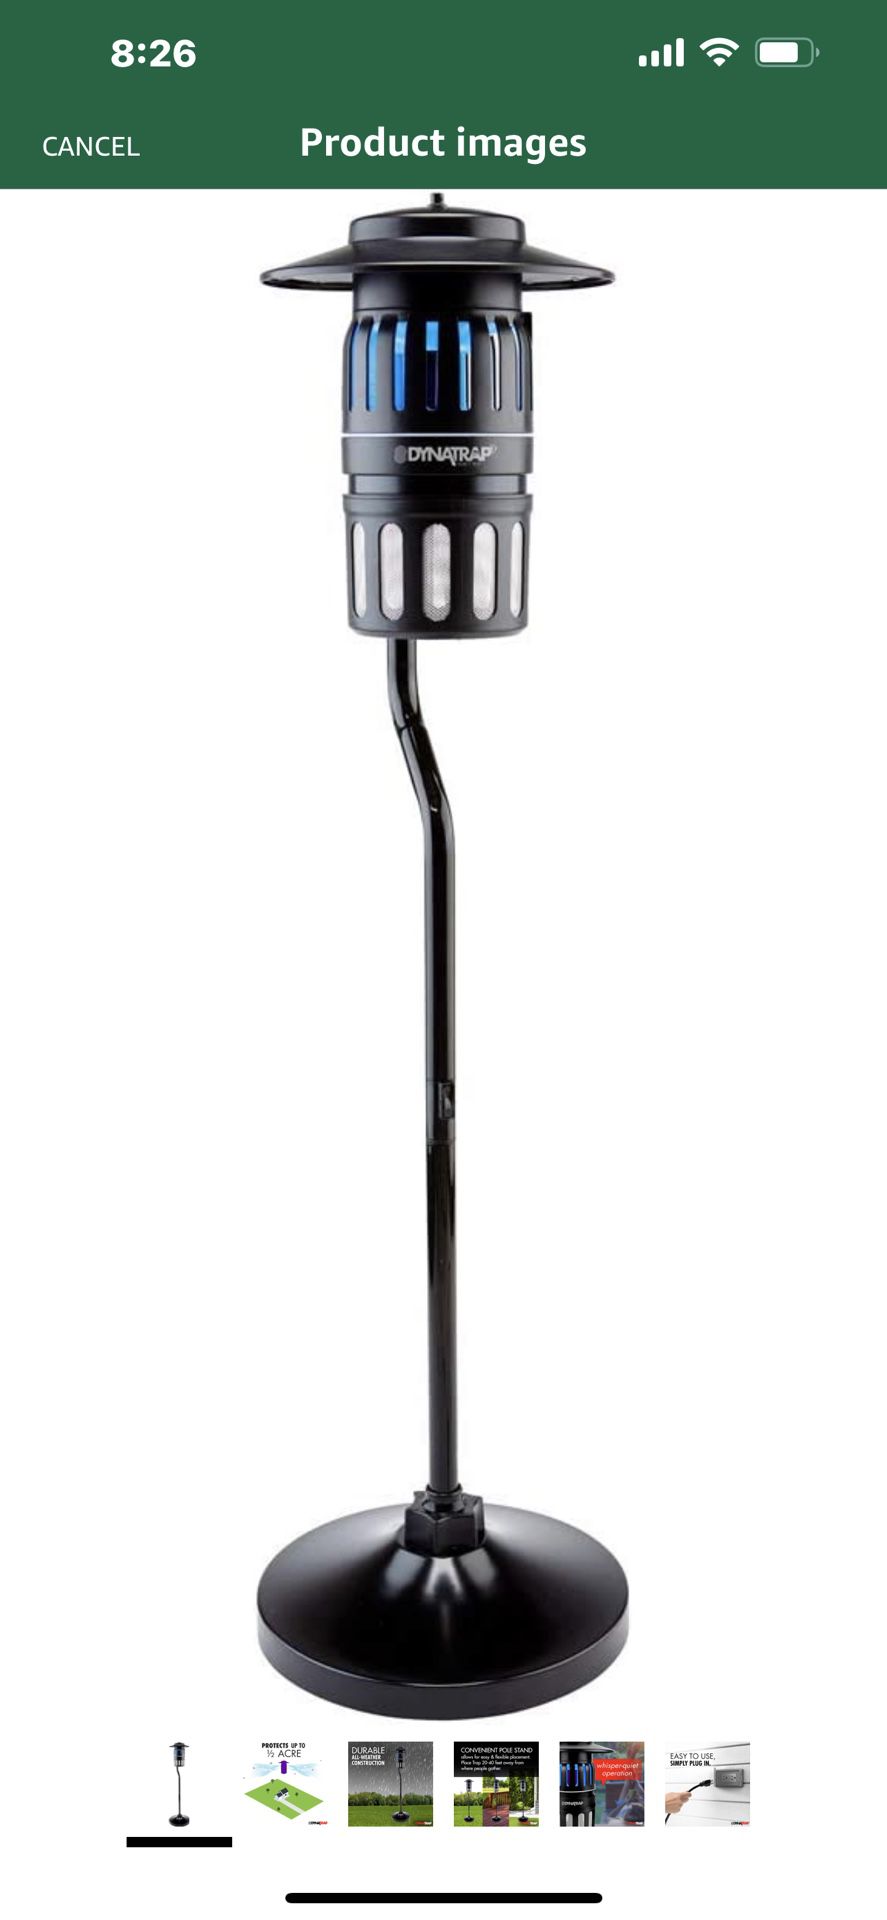 DynaTrap DT1260SR Mosquito & Flying Insect Trap with Pole Mount – Kills Mosquitoes